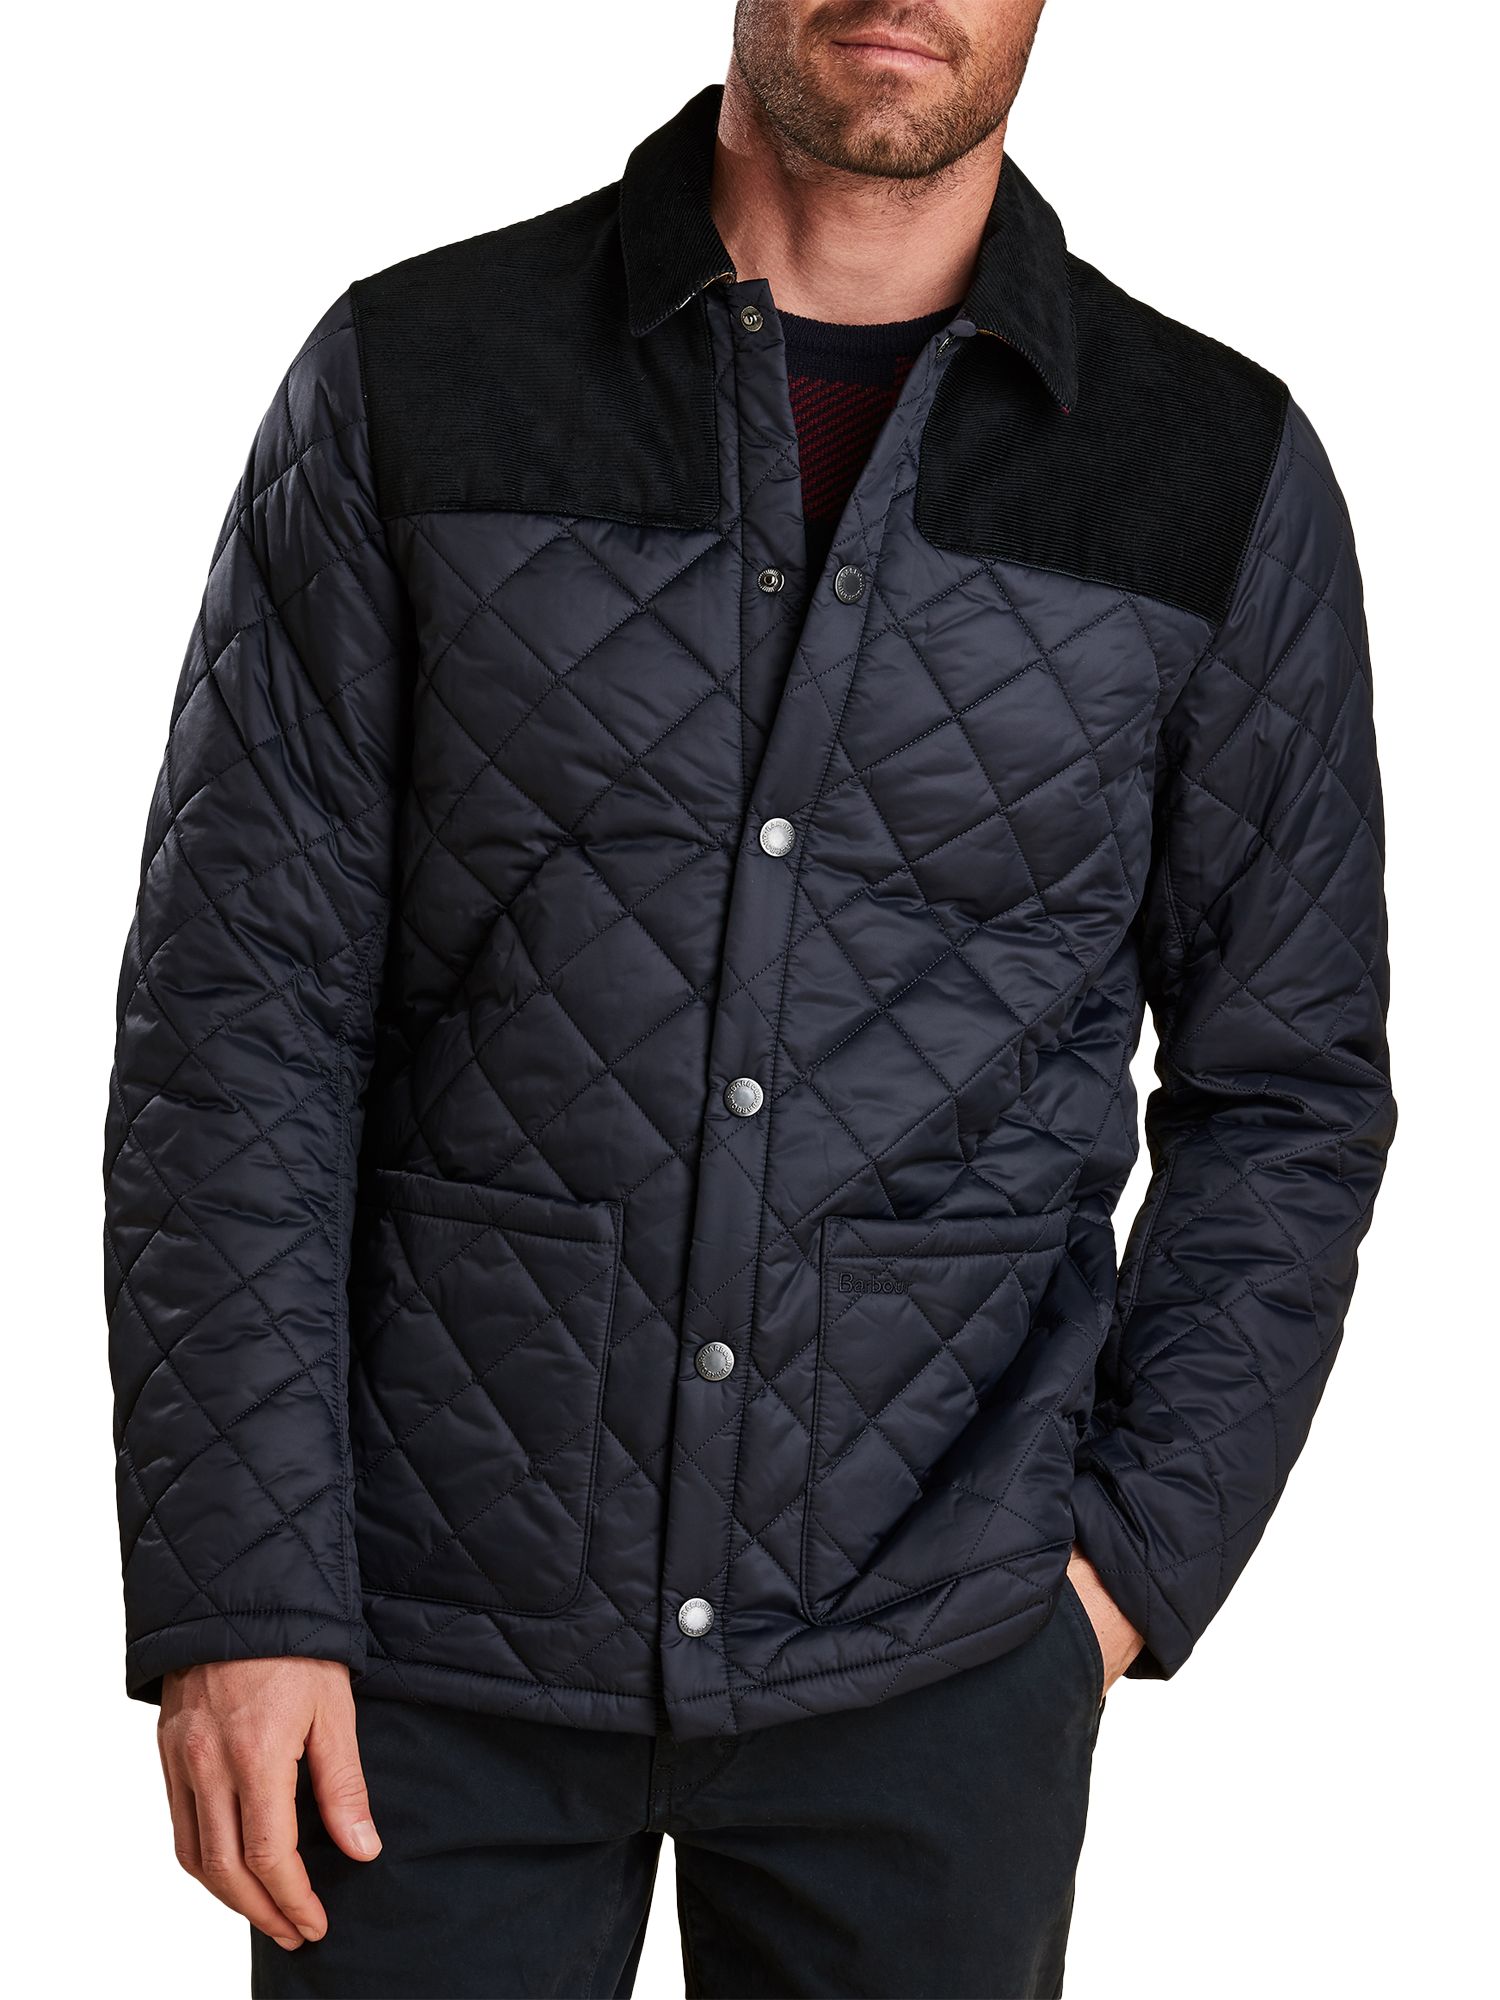 Barbour Gillock Quilted Jacket at John 